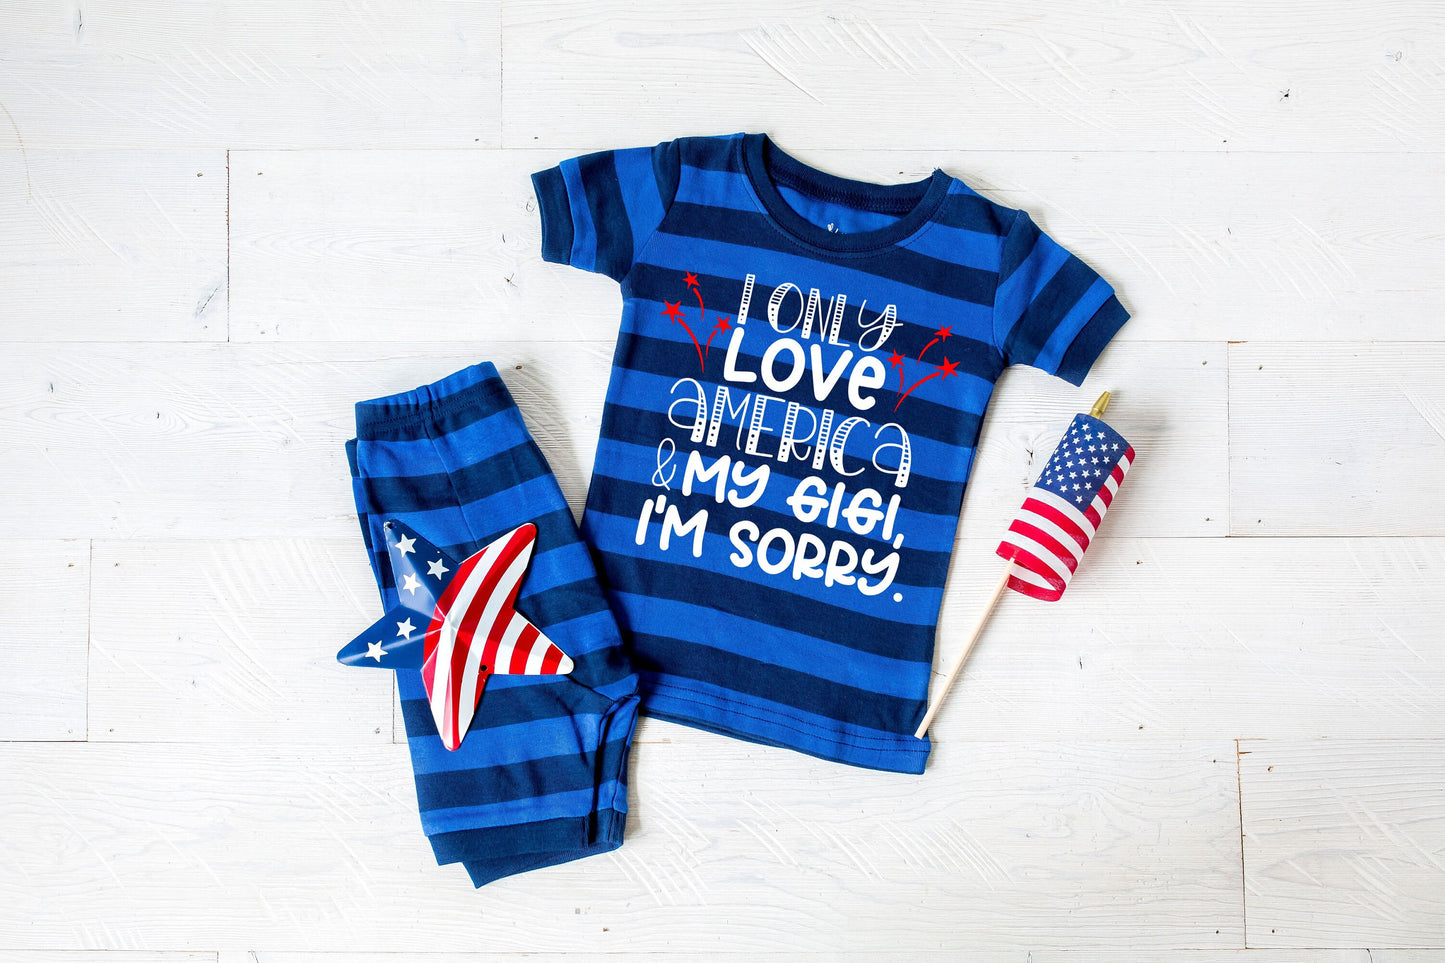 I Only Love America and My Gigi I'm Sorry Blue Striped Shorts Toddler and Kids Pajamas - Kids 4th of July Pajamas - 4th of July Pajamas Set